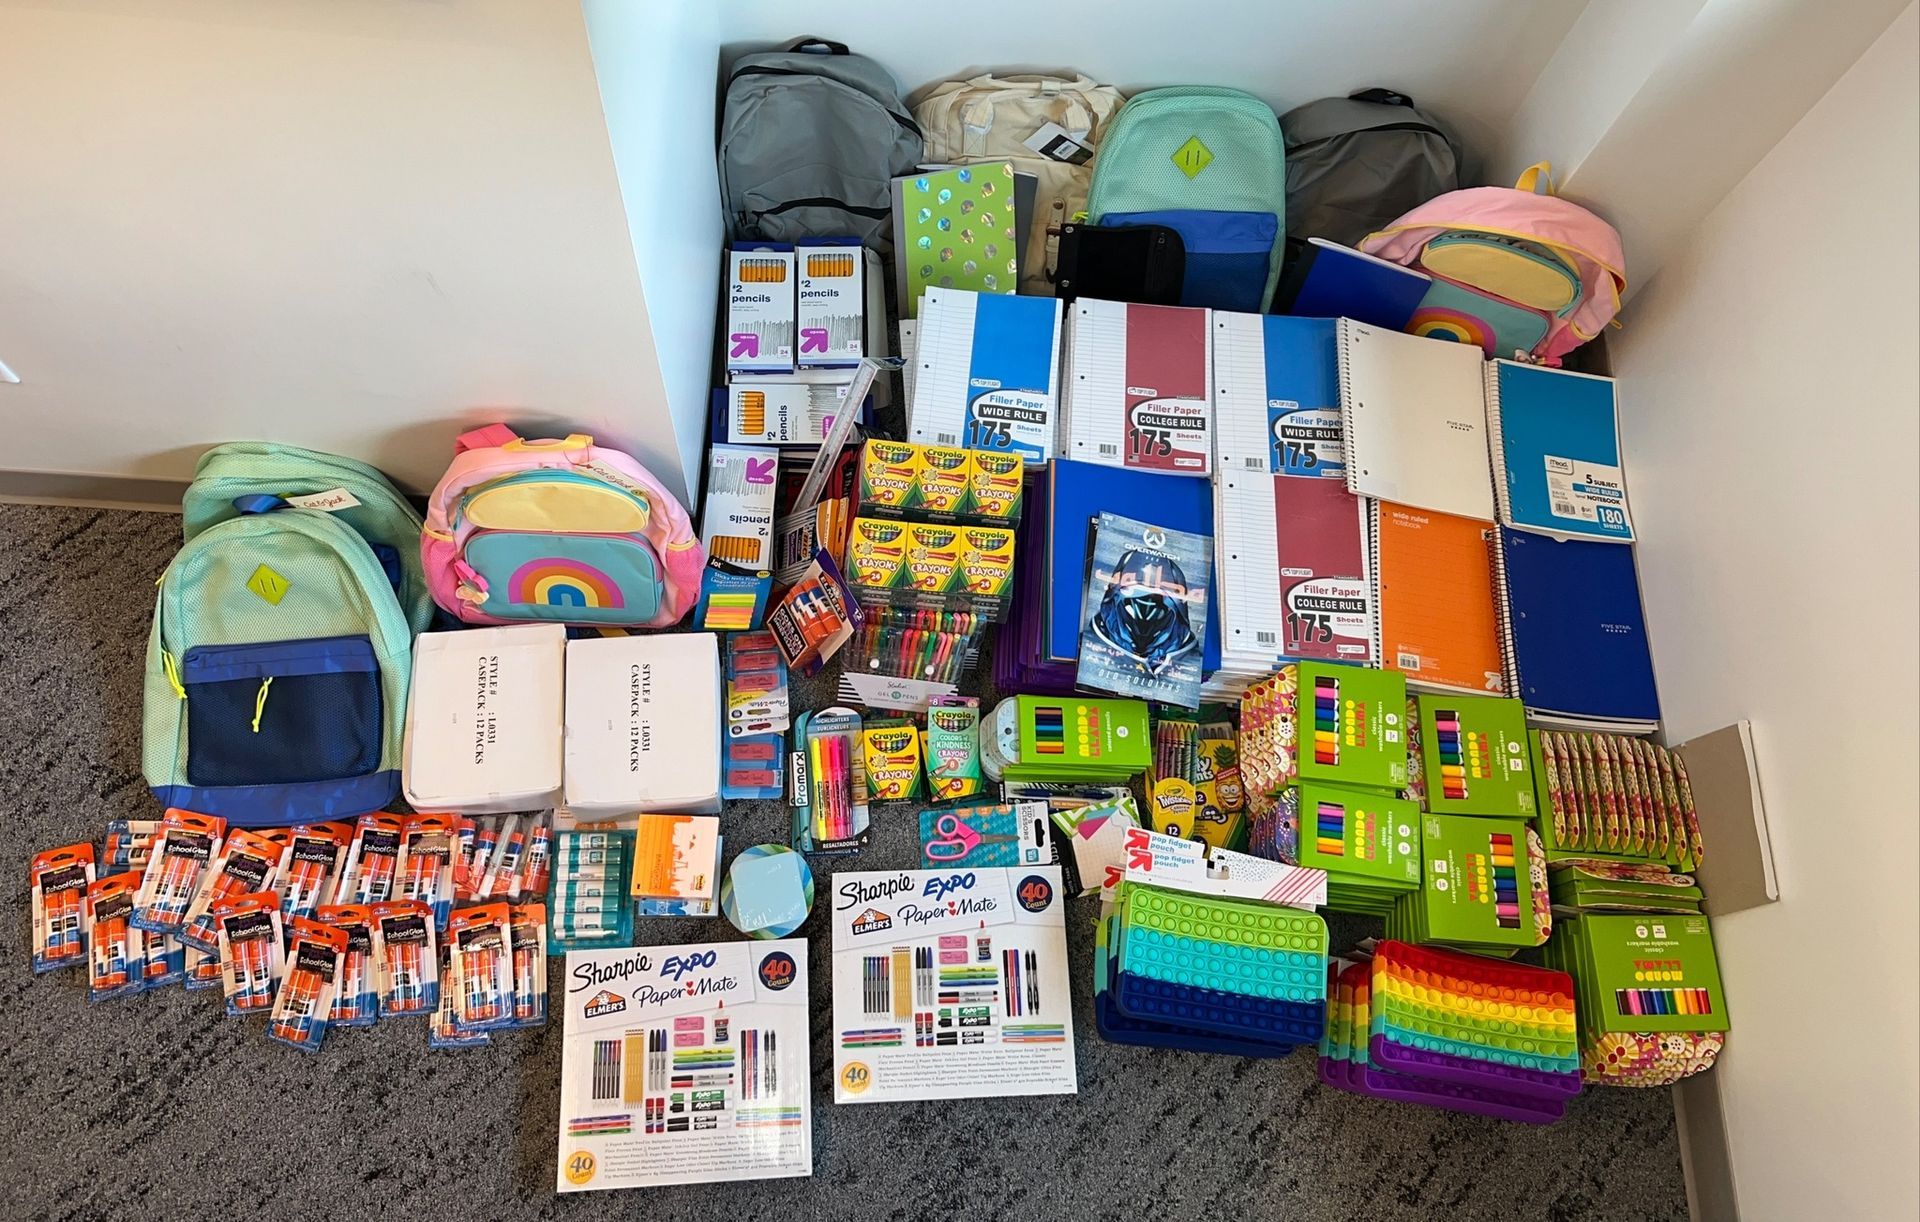 IST's donations for the school supply drive